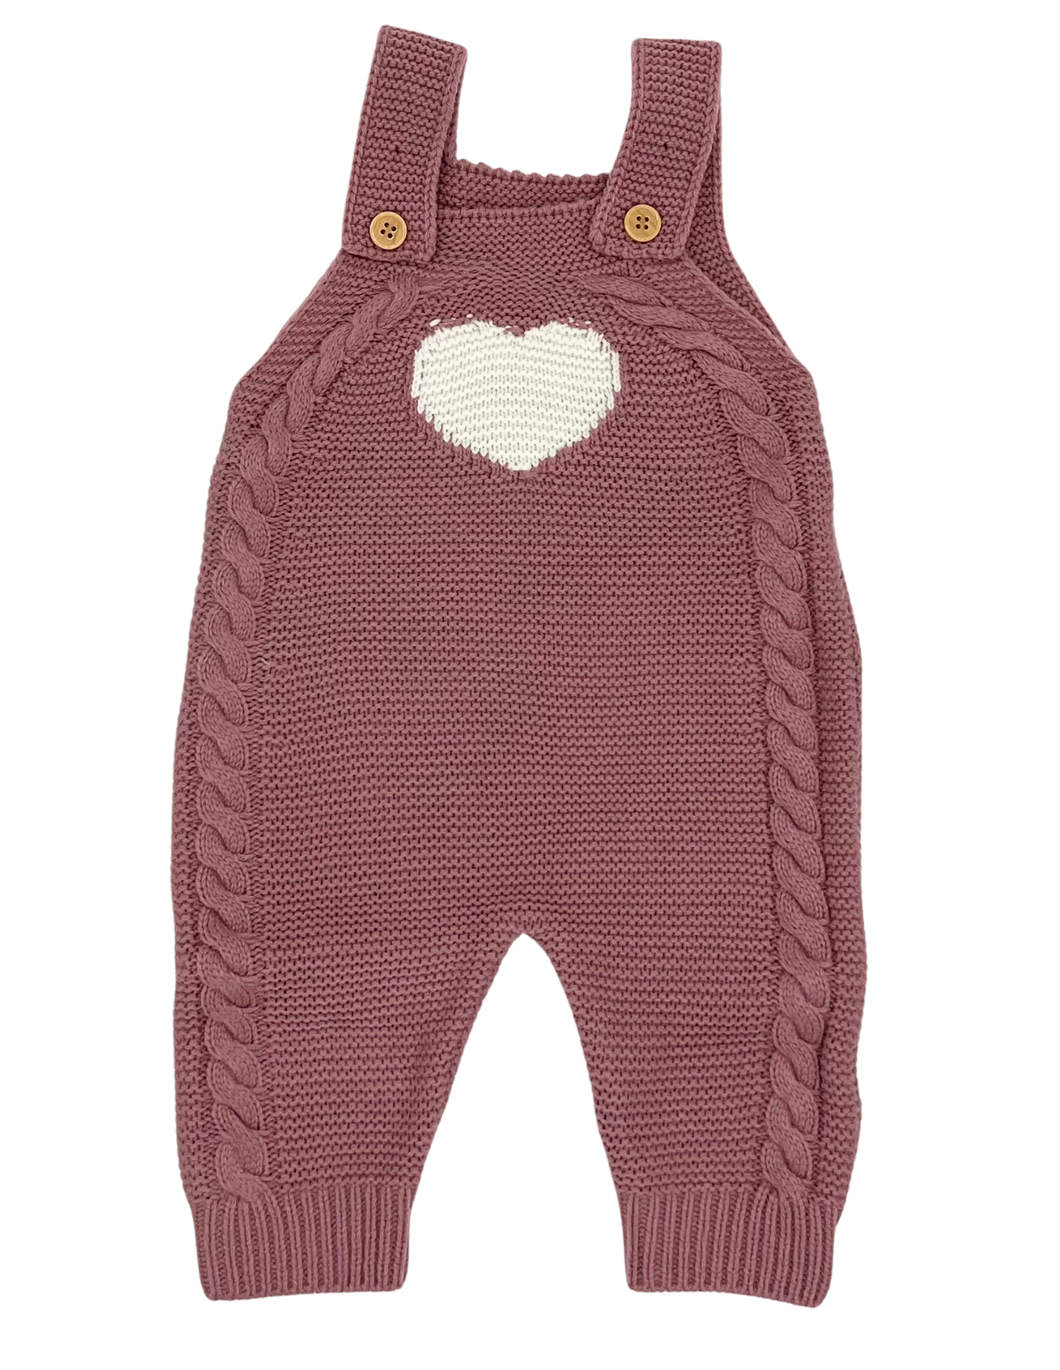 Knitted Heart Overalls - CovetedThings